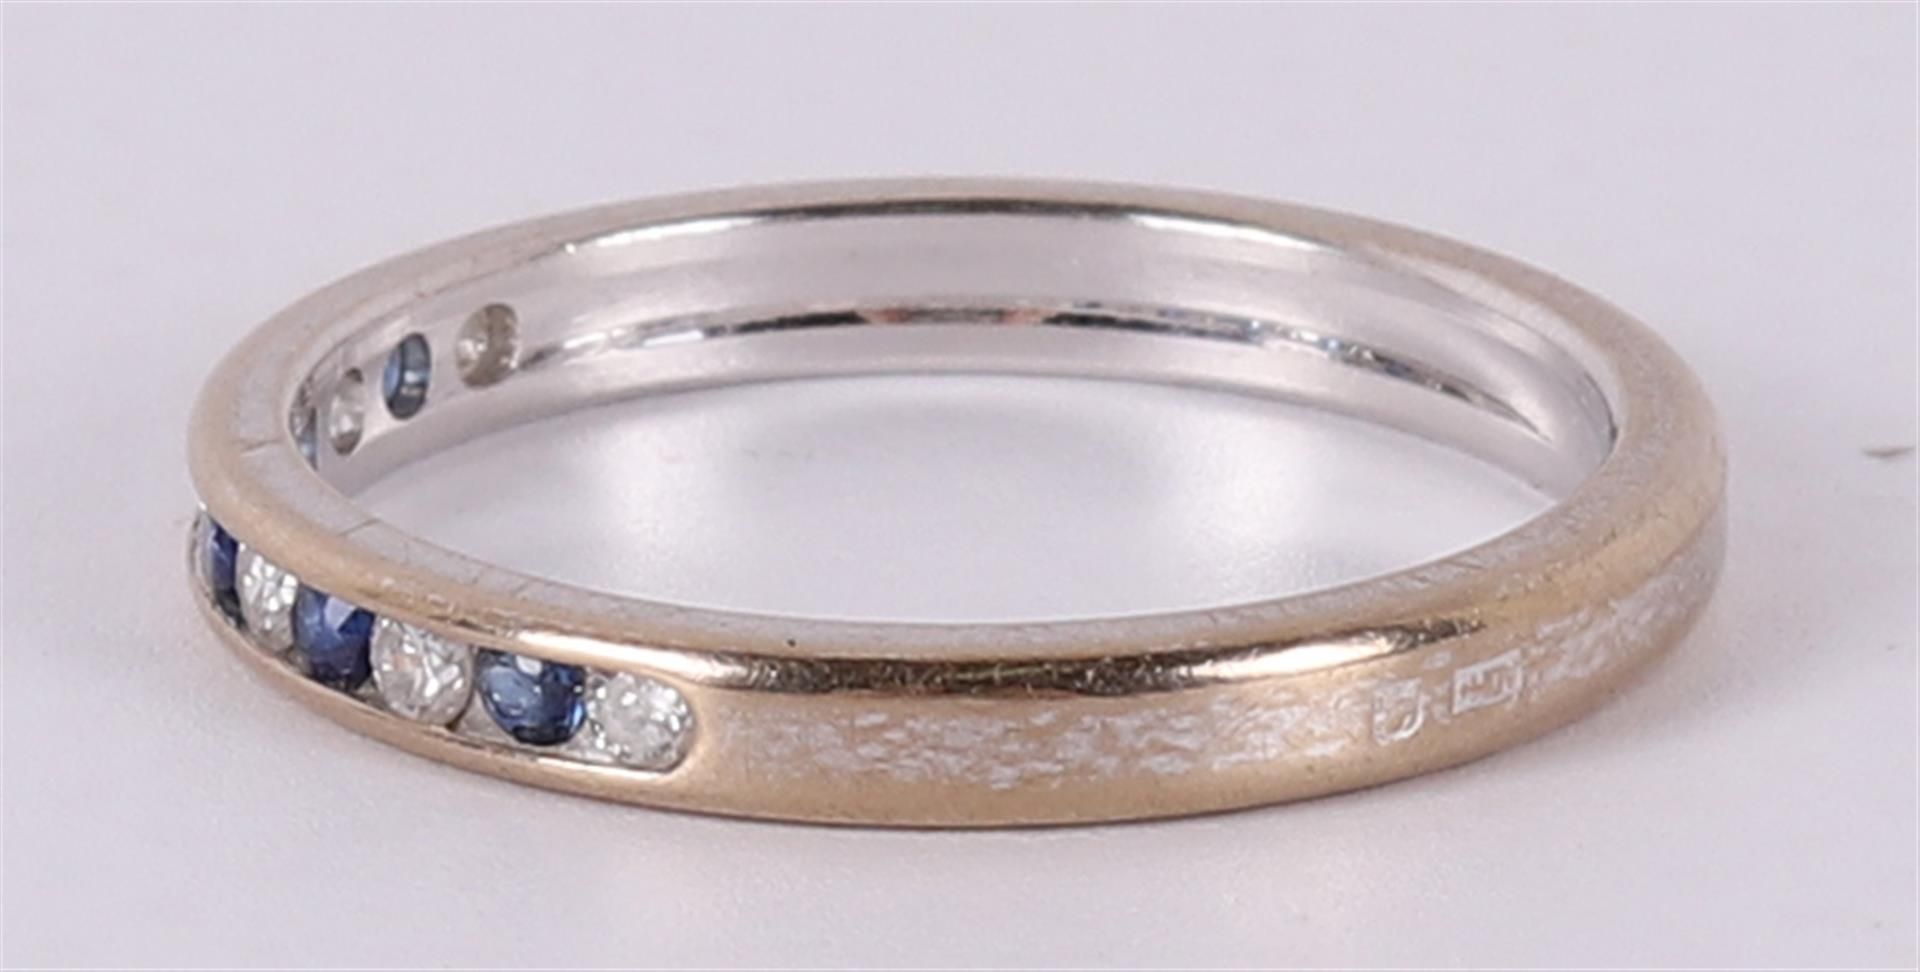 An 18 kt 750/1000 gold row ring with 5 facet cut blue sapphires and 6 brilliants. Ring size 18.25 - Image 2 of 2